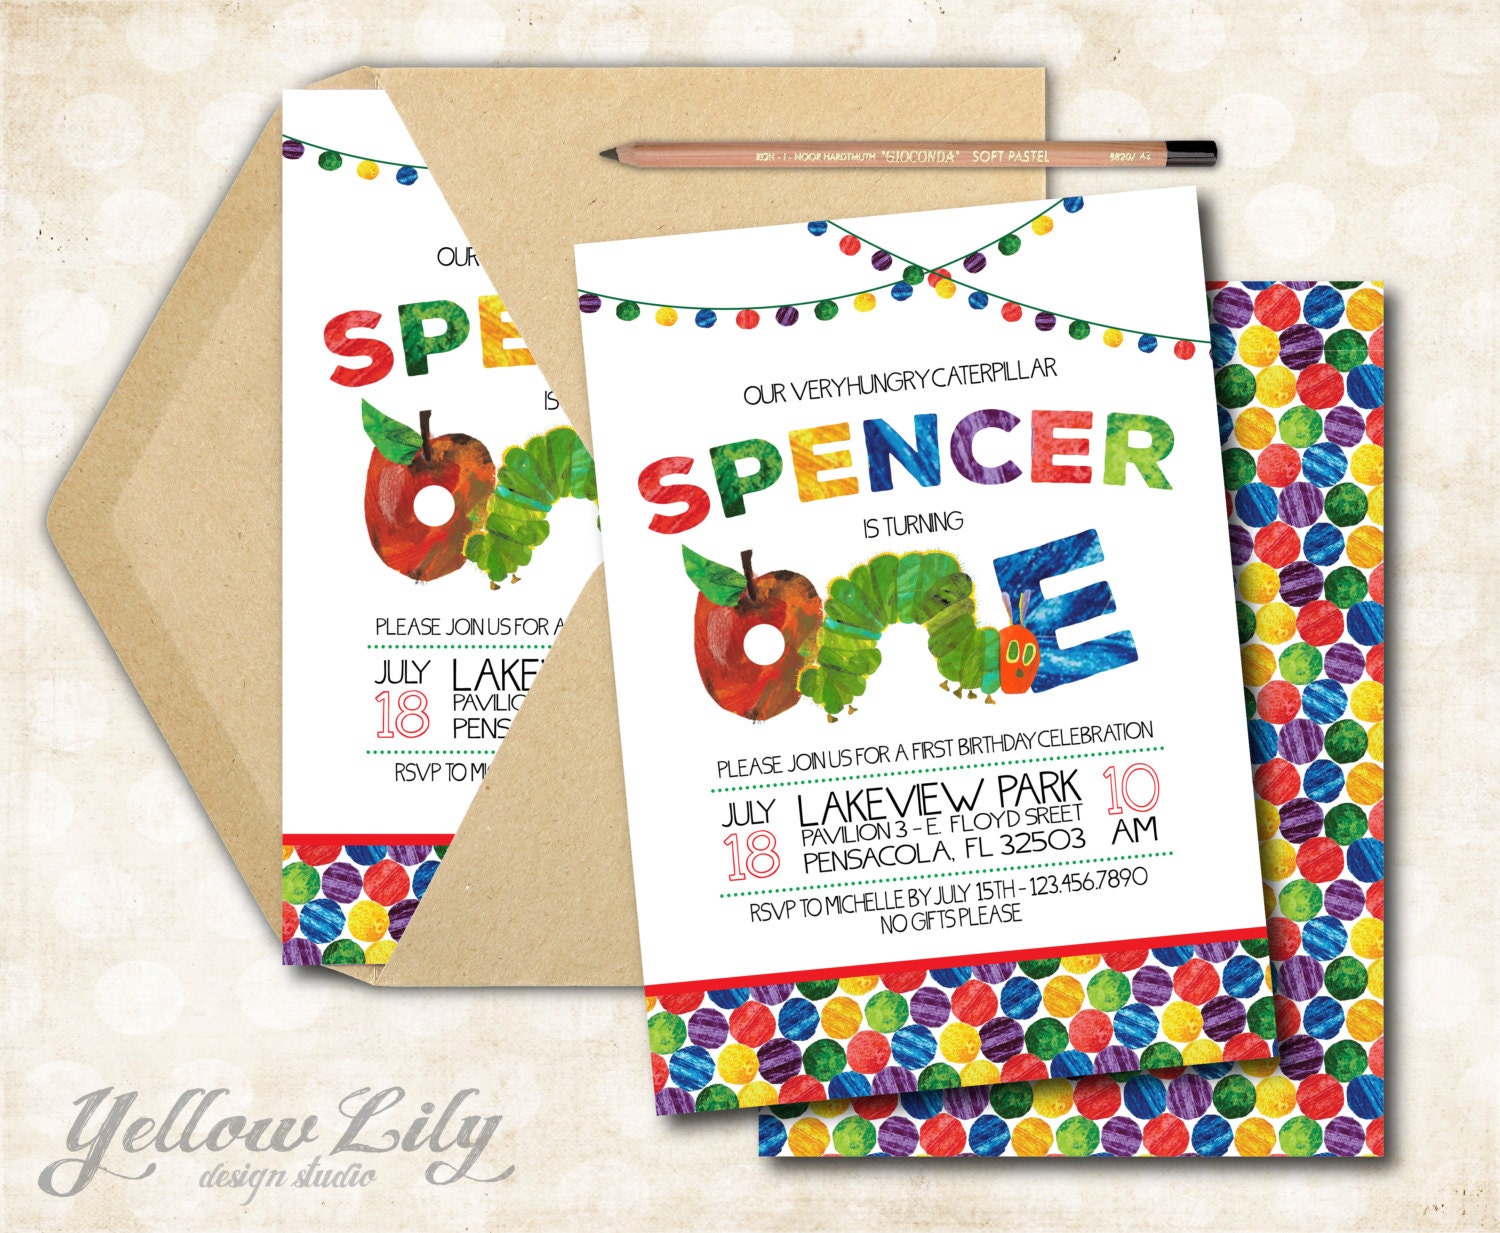 A Very Hungry Caterpillar Party Invitations 7